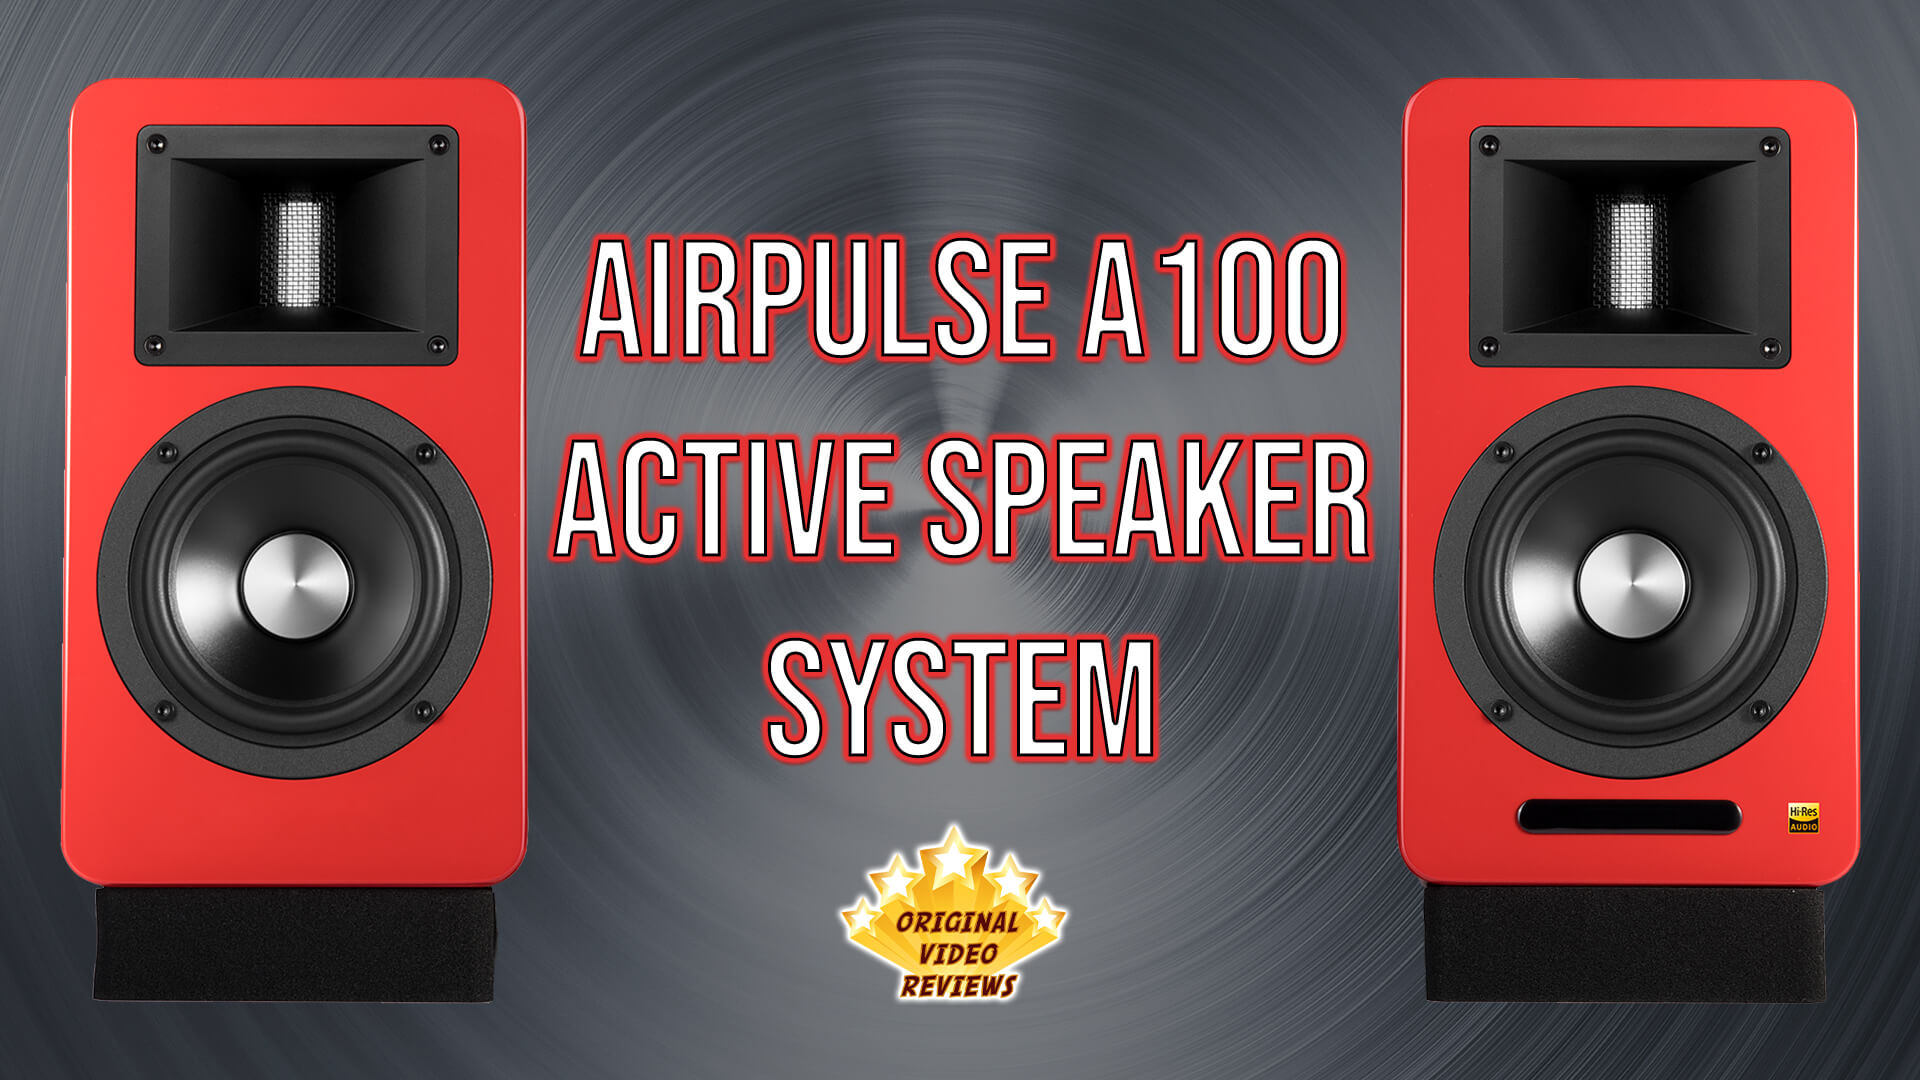 AirPulse A100 active speaker system Review (Thumbnail)